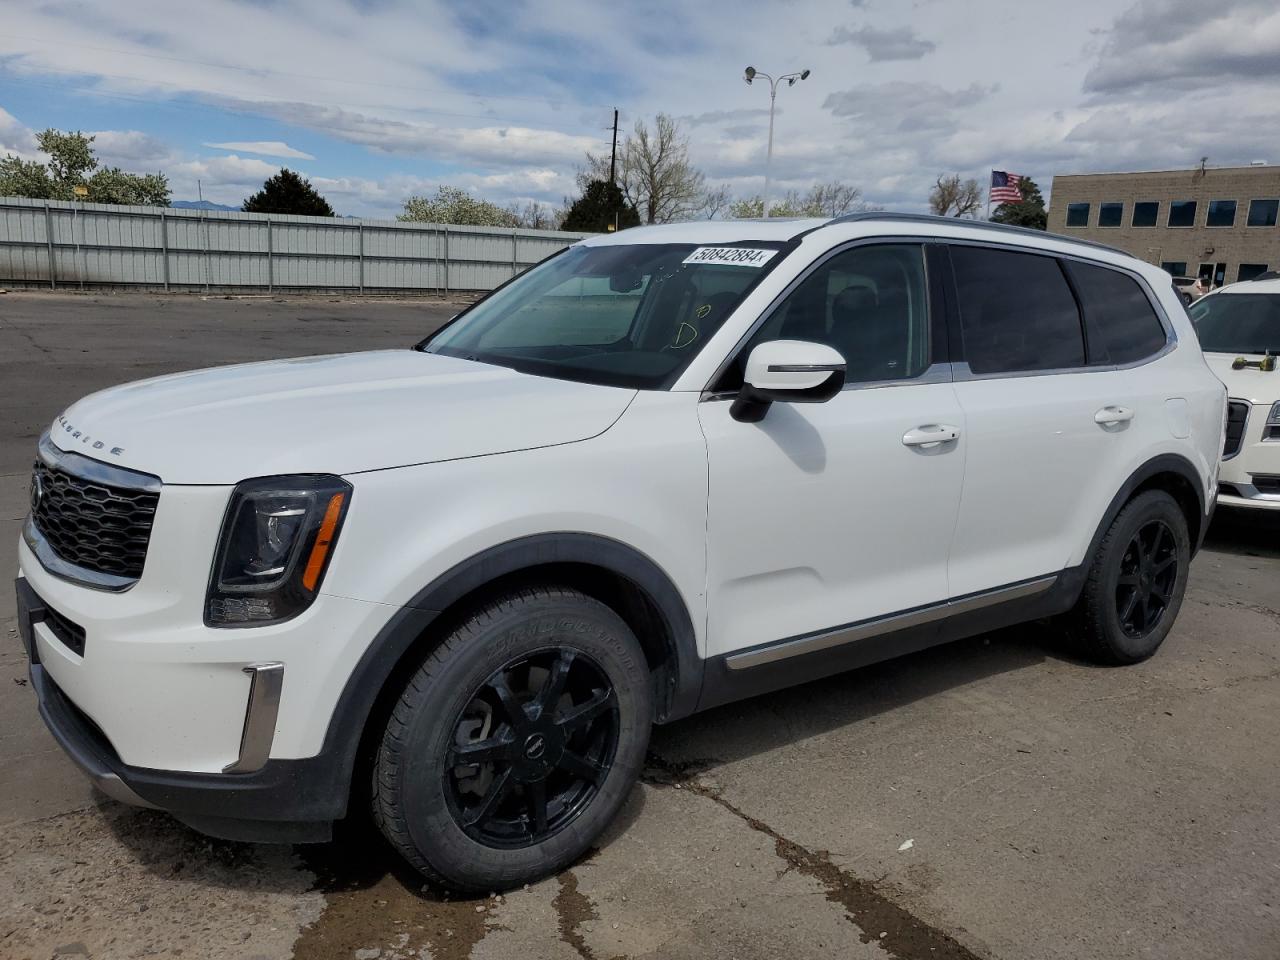 vin: 5XYP3DHC6LG043297 5XYP3DHC6LG043297 2020 kia telluride 3800 for Sale in 80125 9741, Co - Denver South, Littleton, Colorado, USA